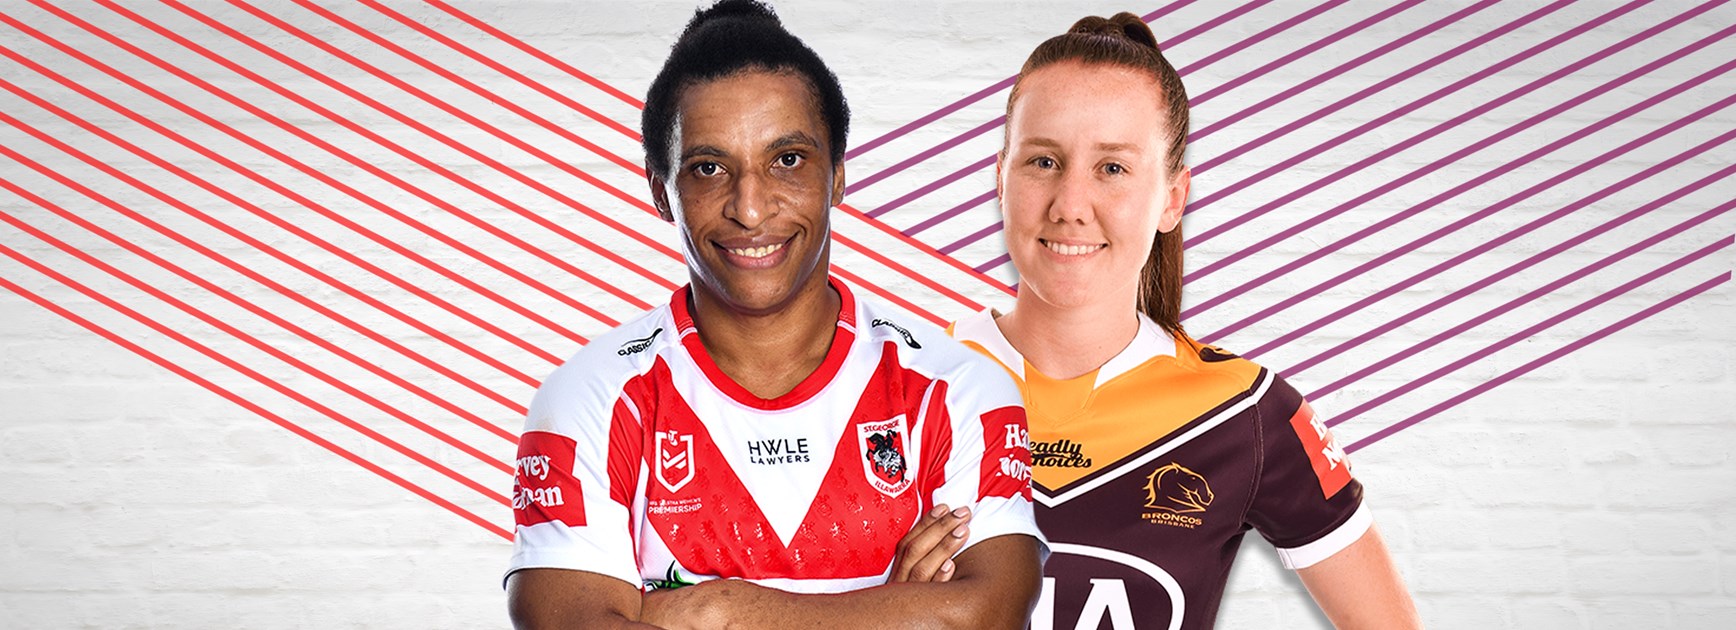 NRLW 2022: St George Illawarra Dragons v Brisbane Broncos, match preview,  team lists, live stream, TV info, top of the table clash awaits